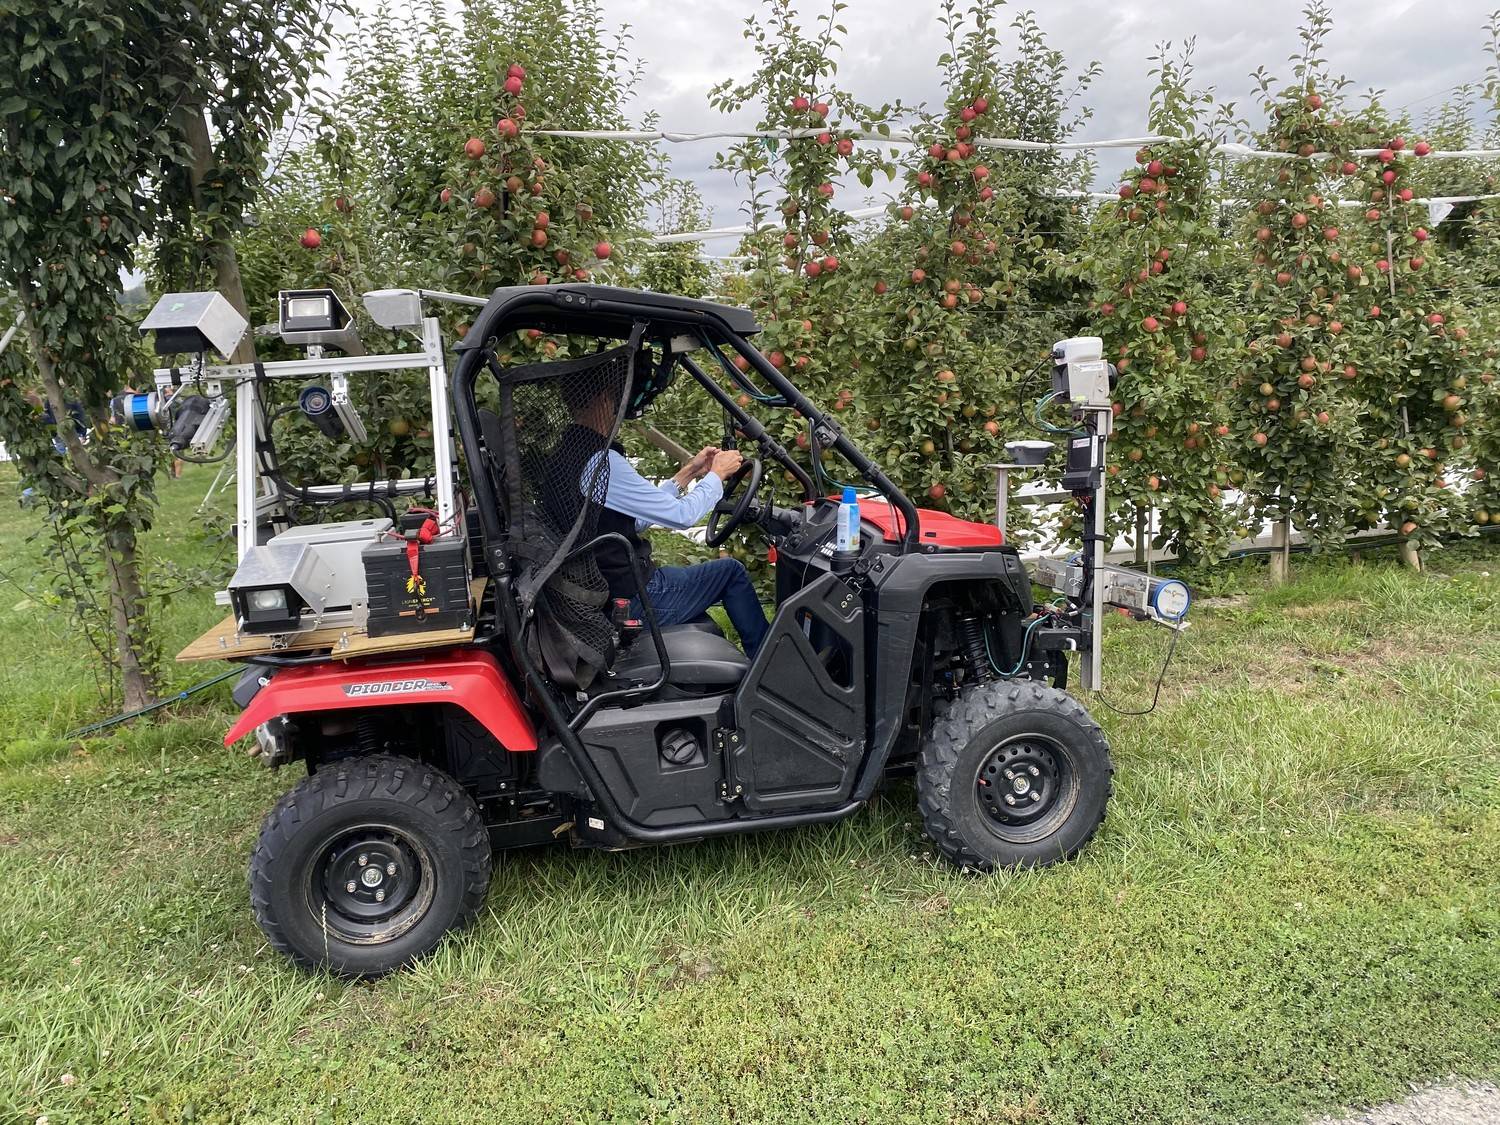 The Food Resiliency Project funded by Snohomish County leverages IoT and edge connectivity to deliver real-time data to farmers